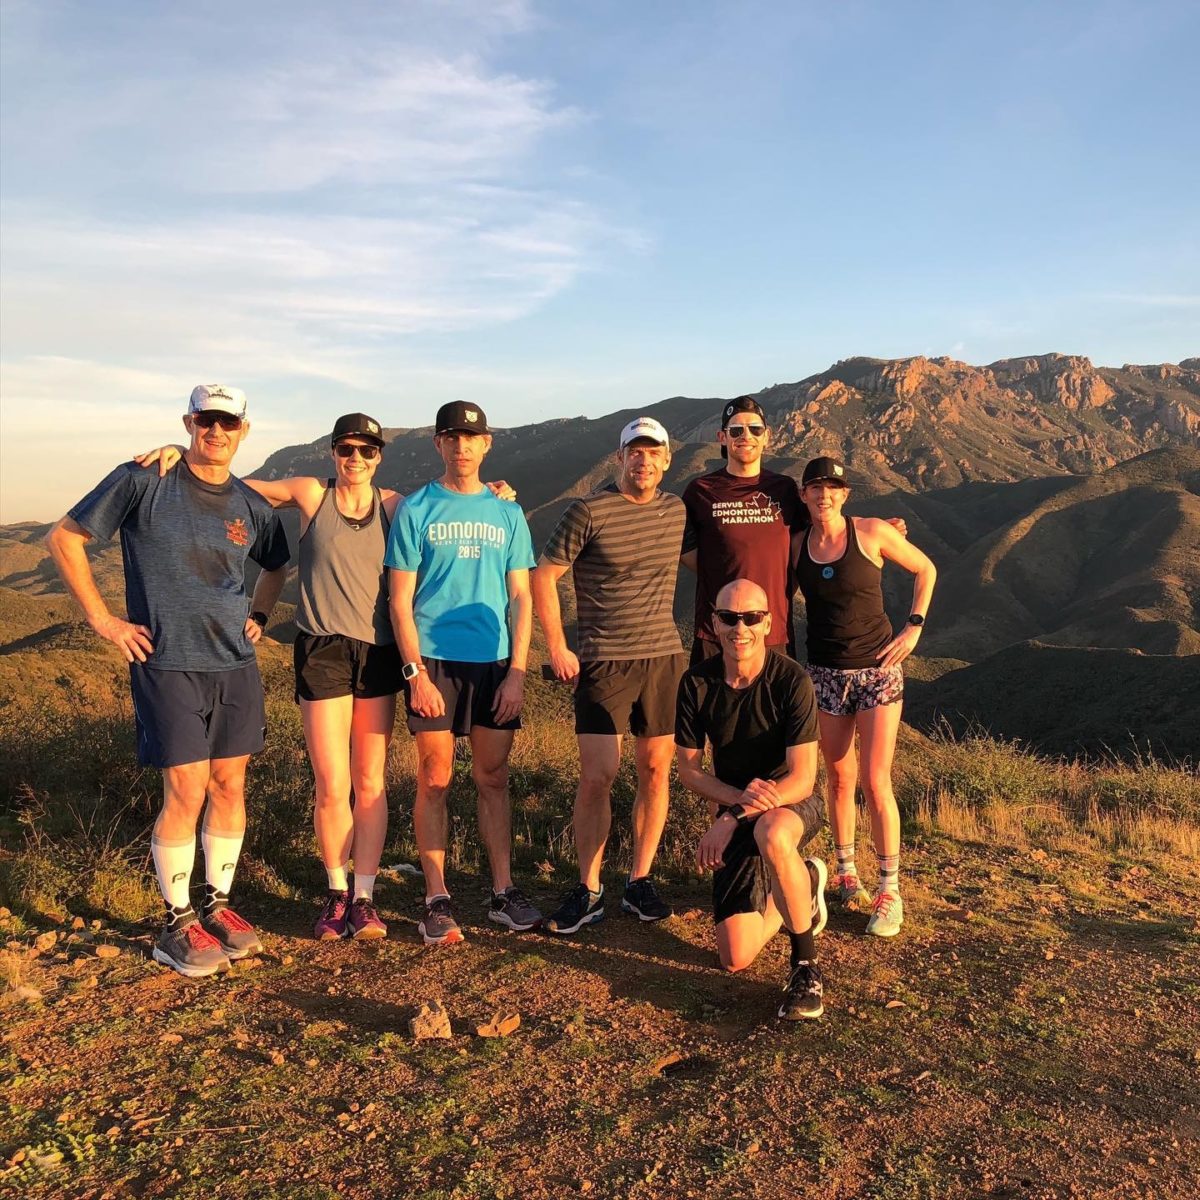 Runners in Santa Monica Mountains with Sun Setting during Vertical Camp 